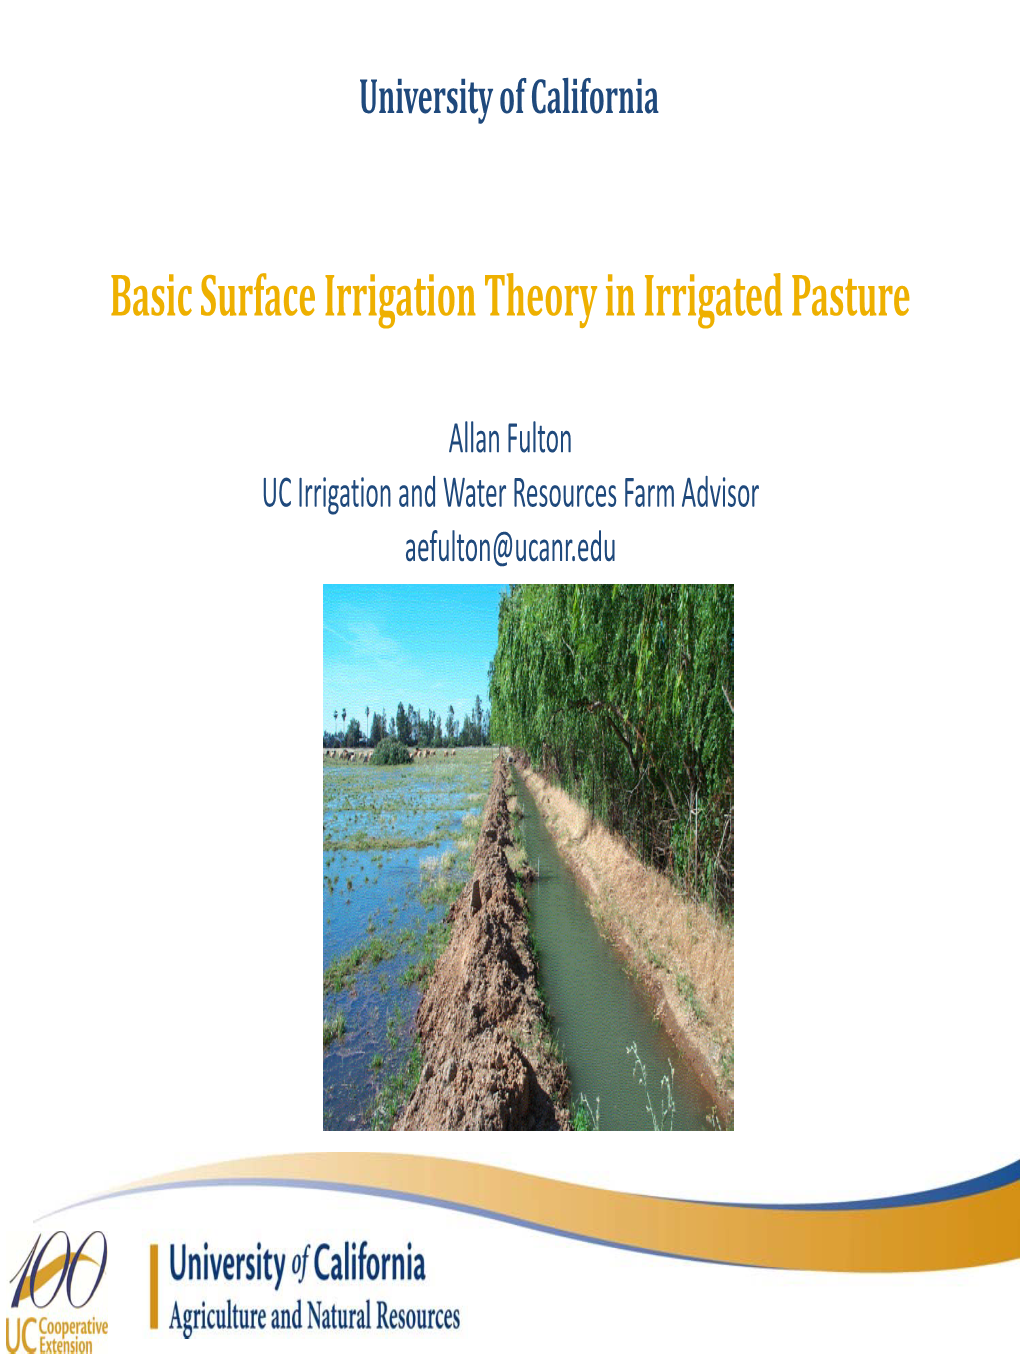 Basic Surface Irrigation Theory in Irrigated Pasture